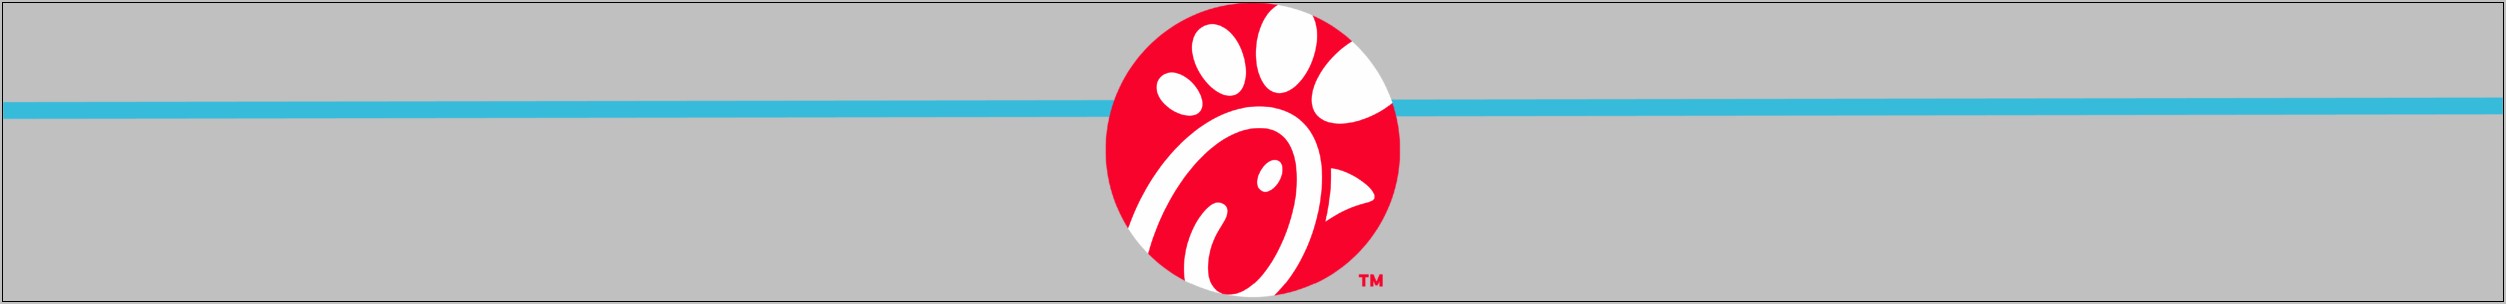 Chick Fil A Boh Resume Examples